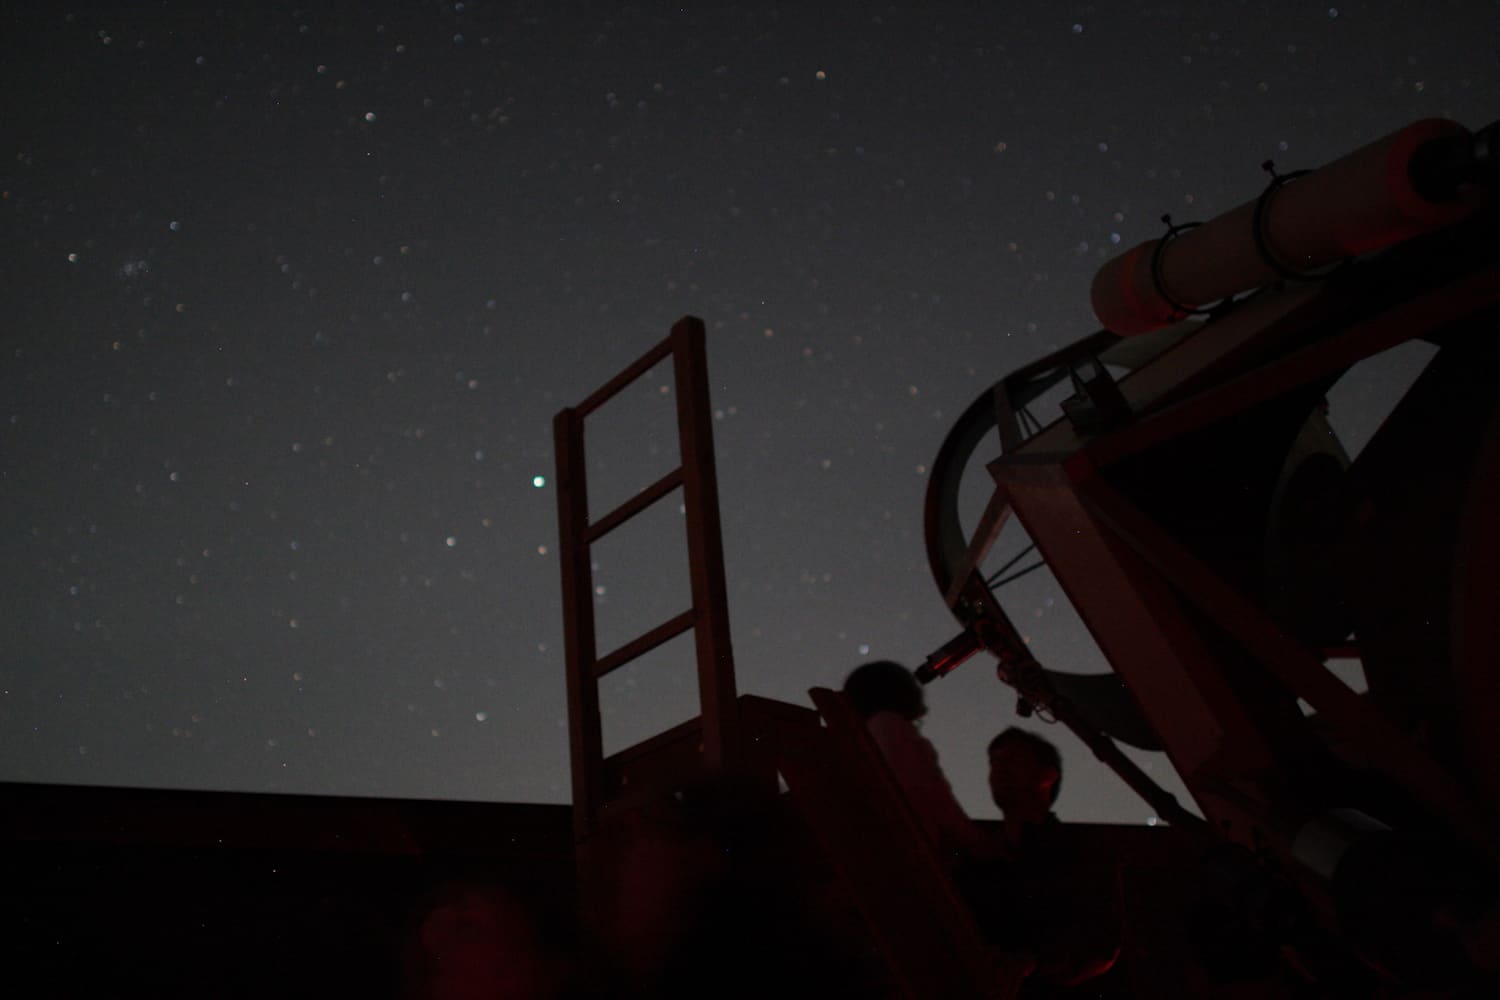 Using the Challenger telescope during a public program